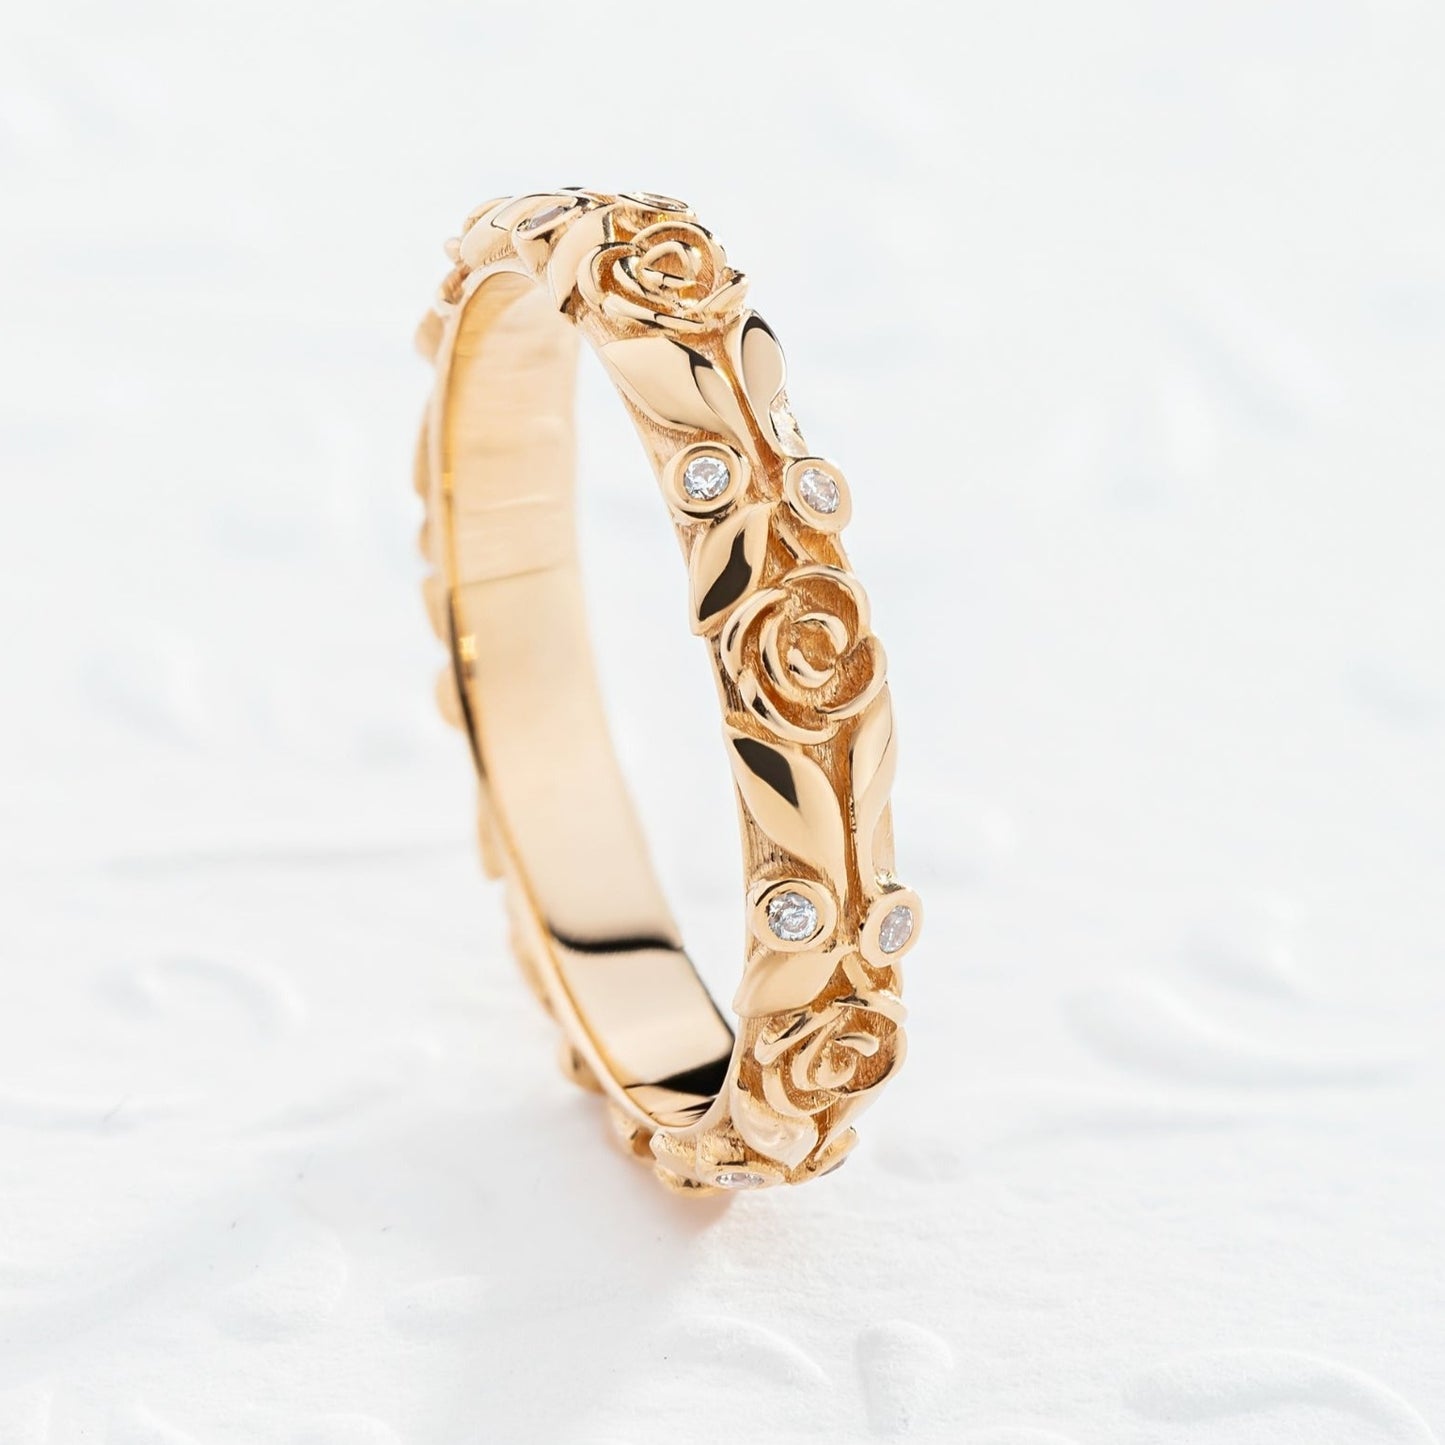 Women's wedding band with floral details, wedding ring with roses, flowers wedding band, women's gold ring, rustic wedding band, boho wedding ring